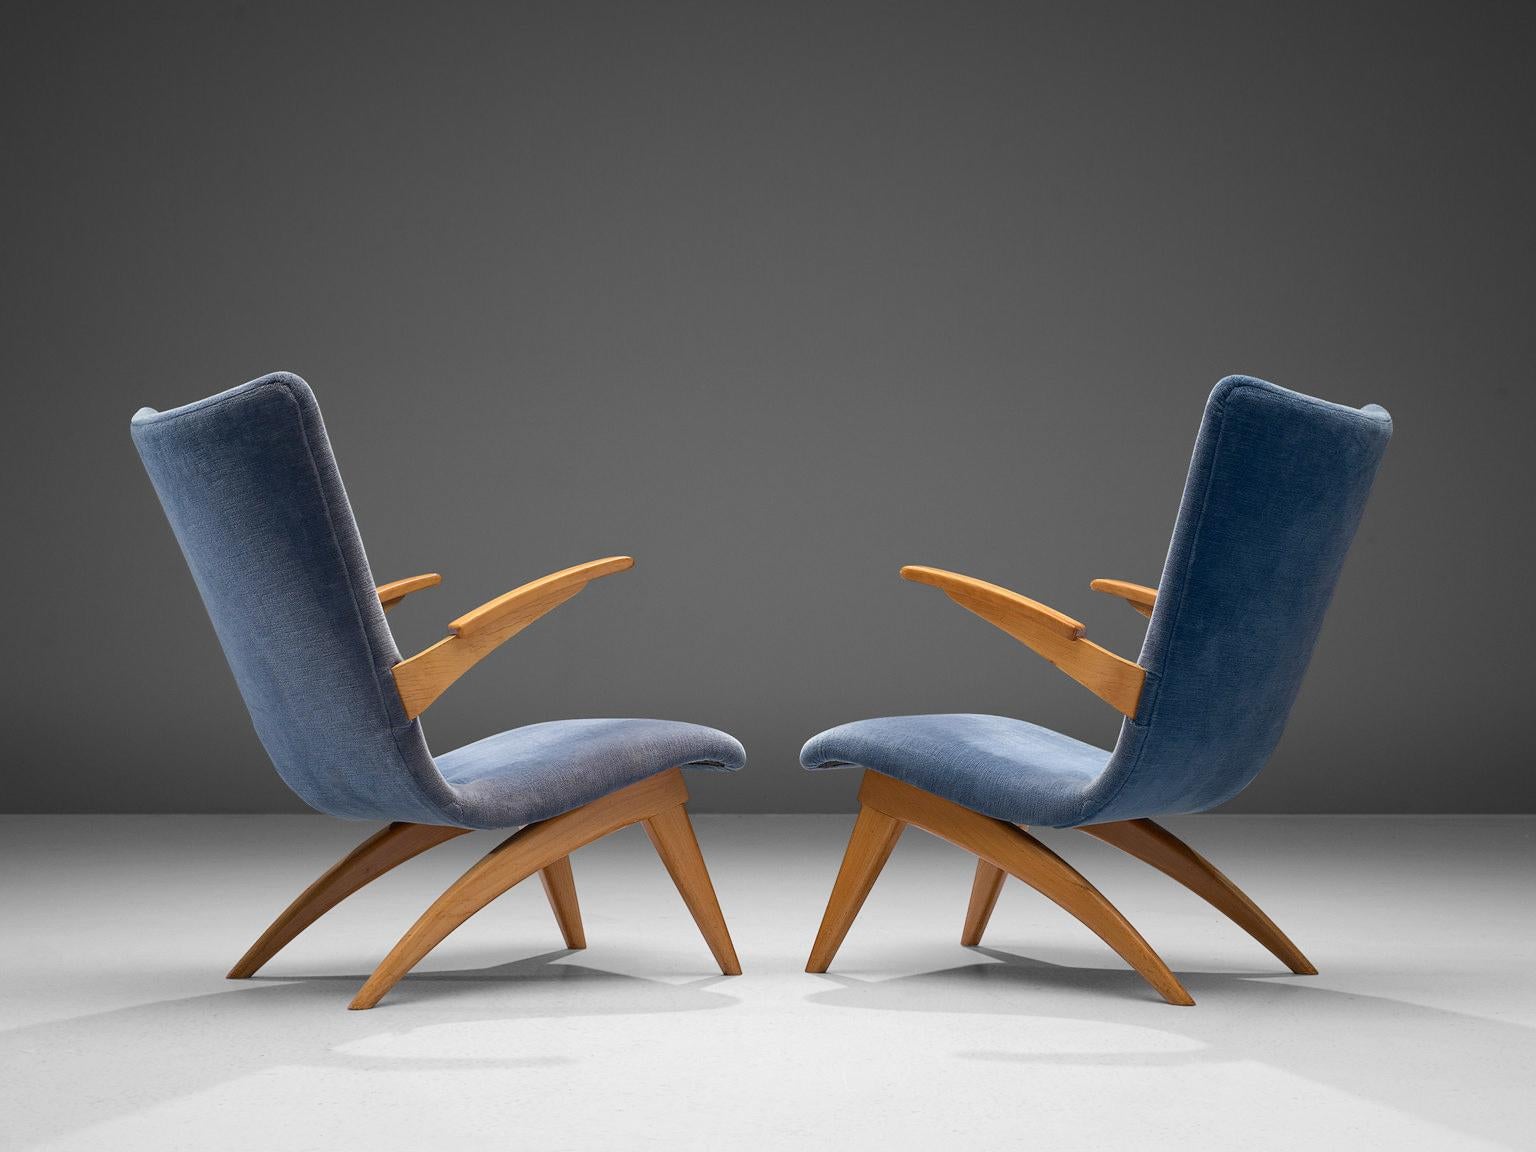 G. Van Os for Van Os Culemborg, pair of armchairs, beech and fabric, The Netherlands, 1950s.

This pair of easy chairs is designed by Dutch designer G. Van Os in the 1950s. These lounge chairs, executed in beech and blue fabric have backrests that